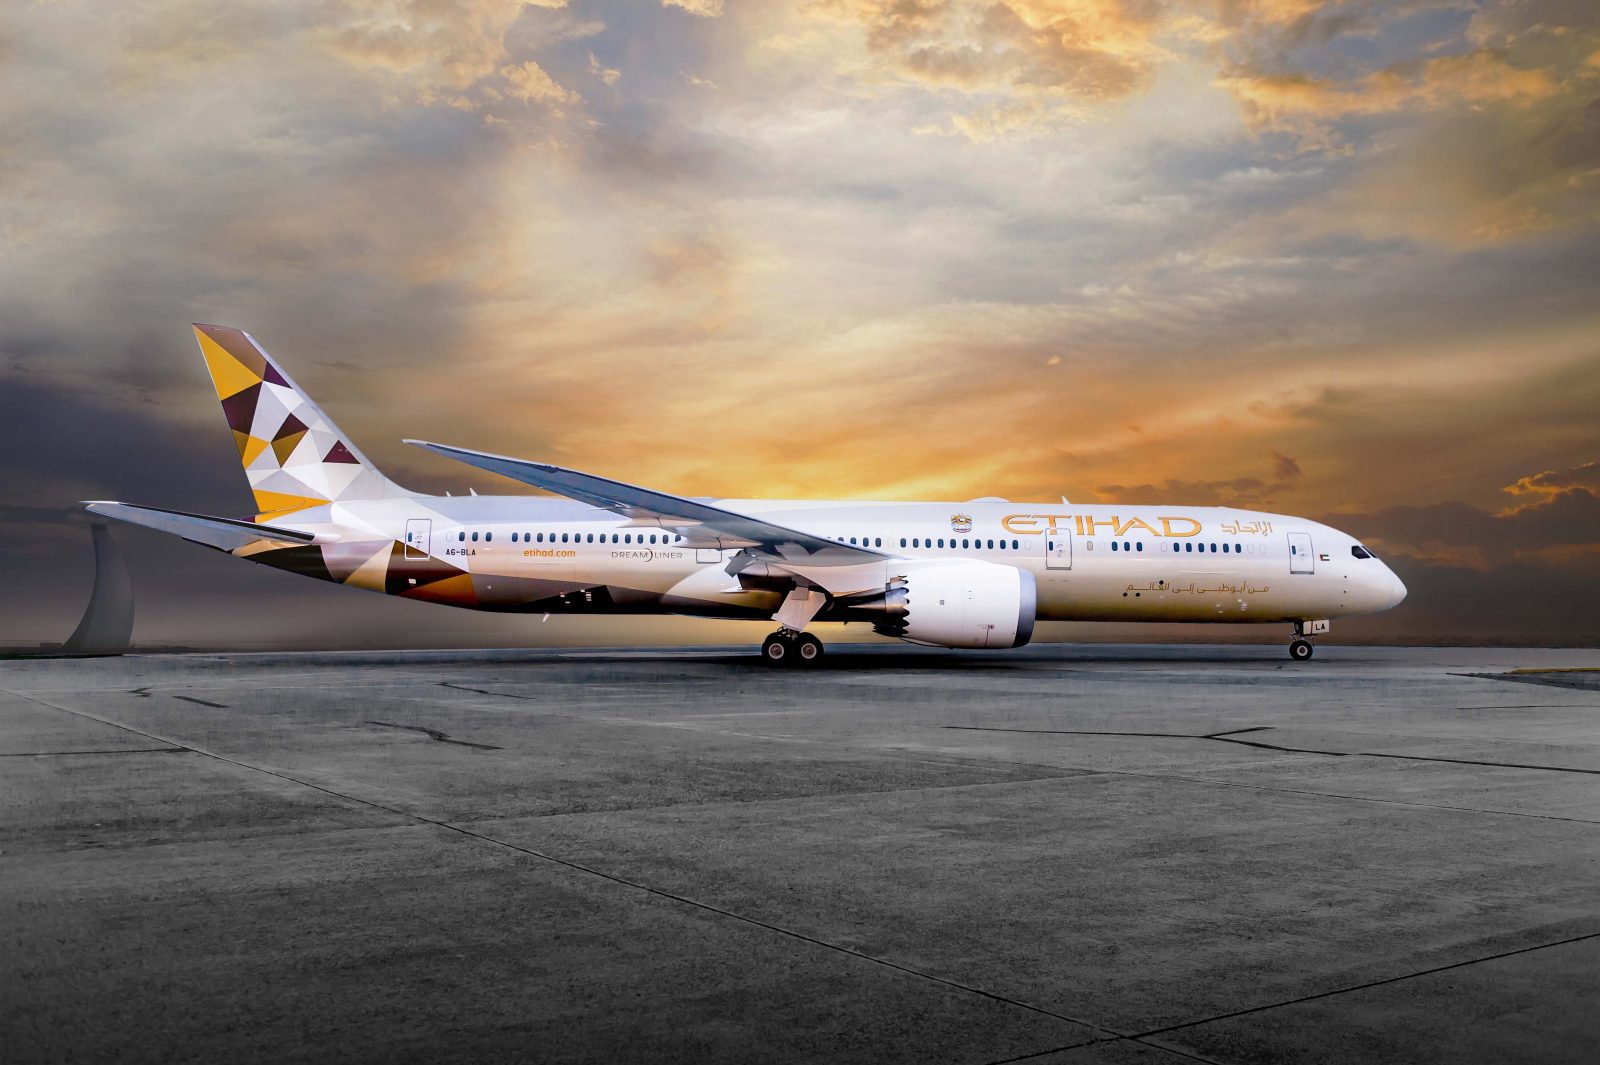 FIRST LOOK: Etihad Has a Special F1 Grand Prix Livery On Its New Boeing 787-9 Dreamliner